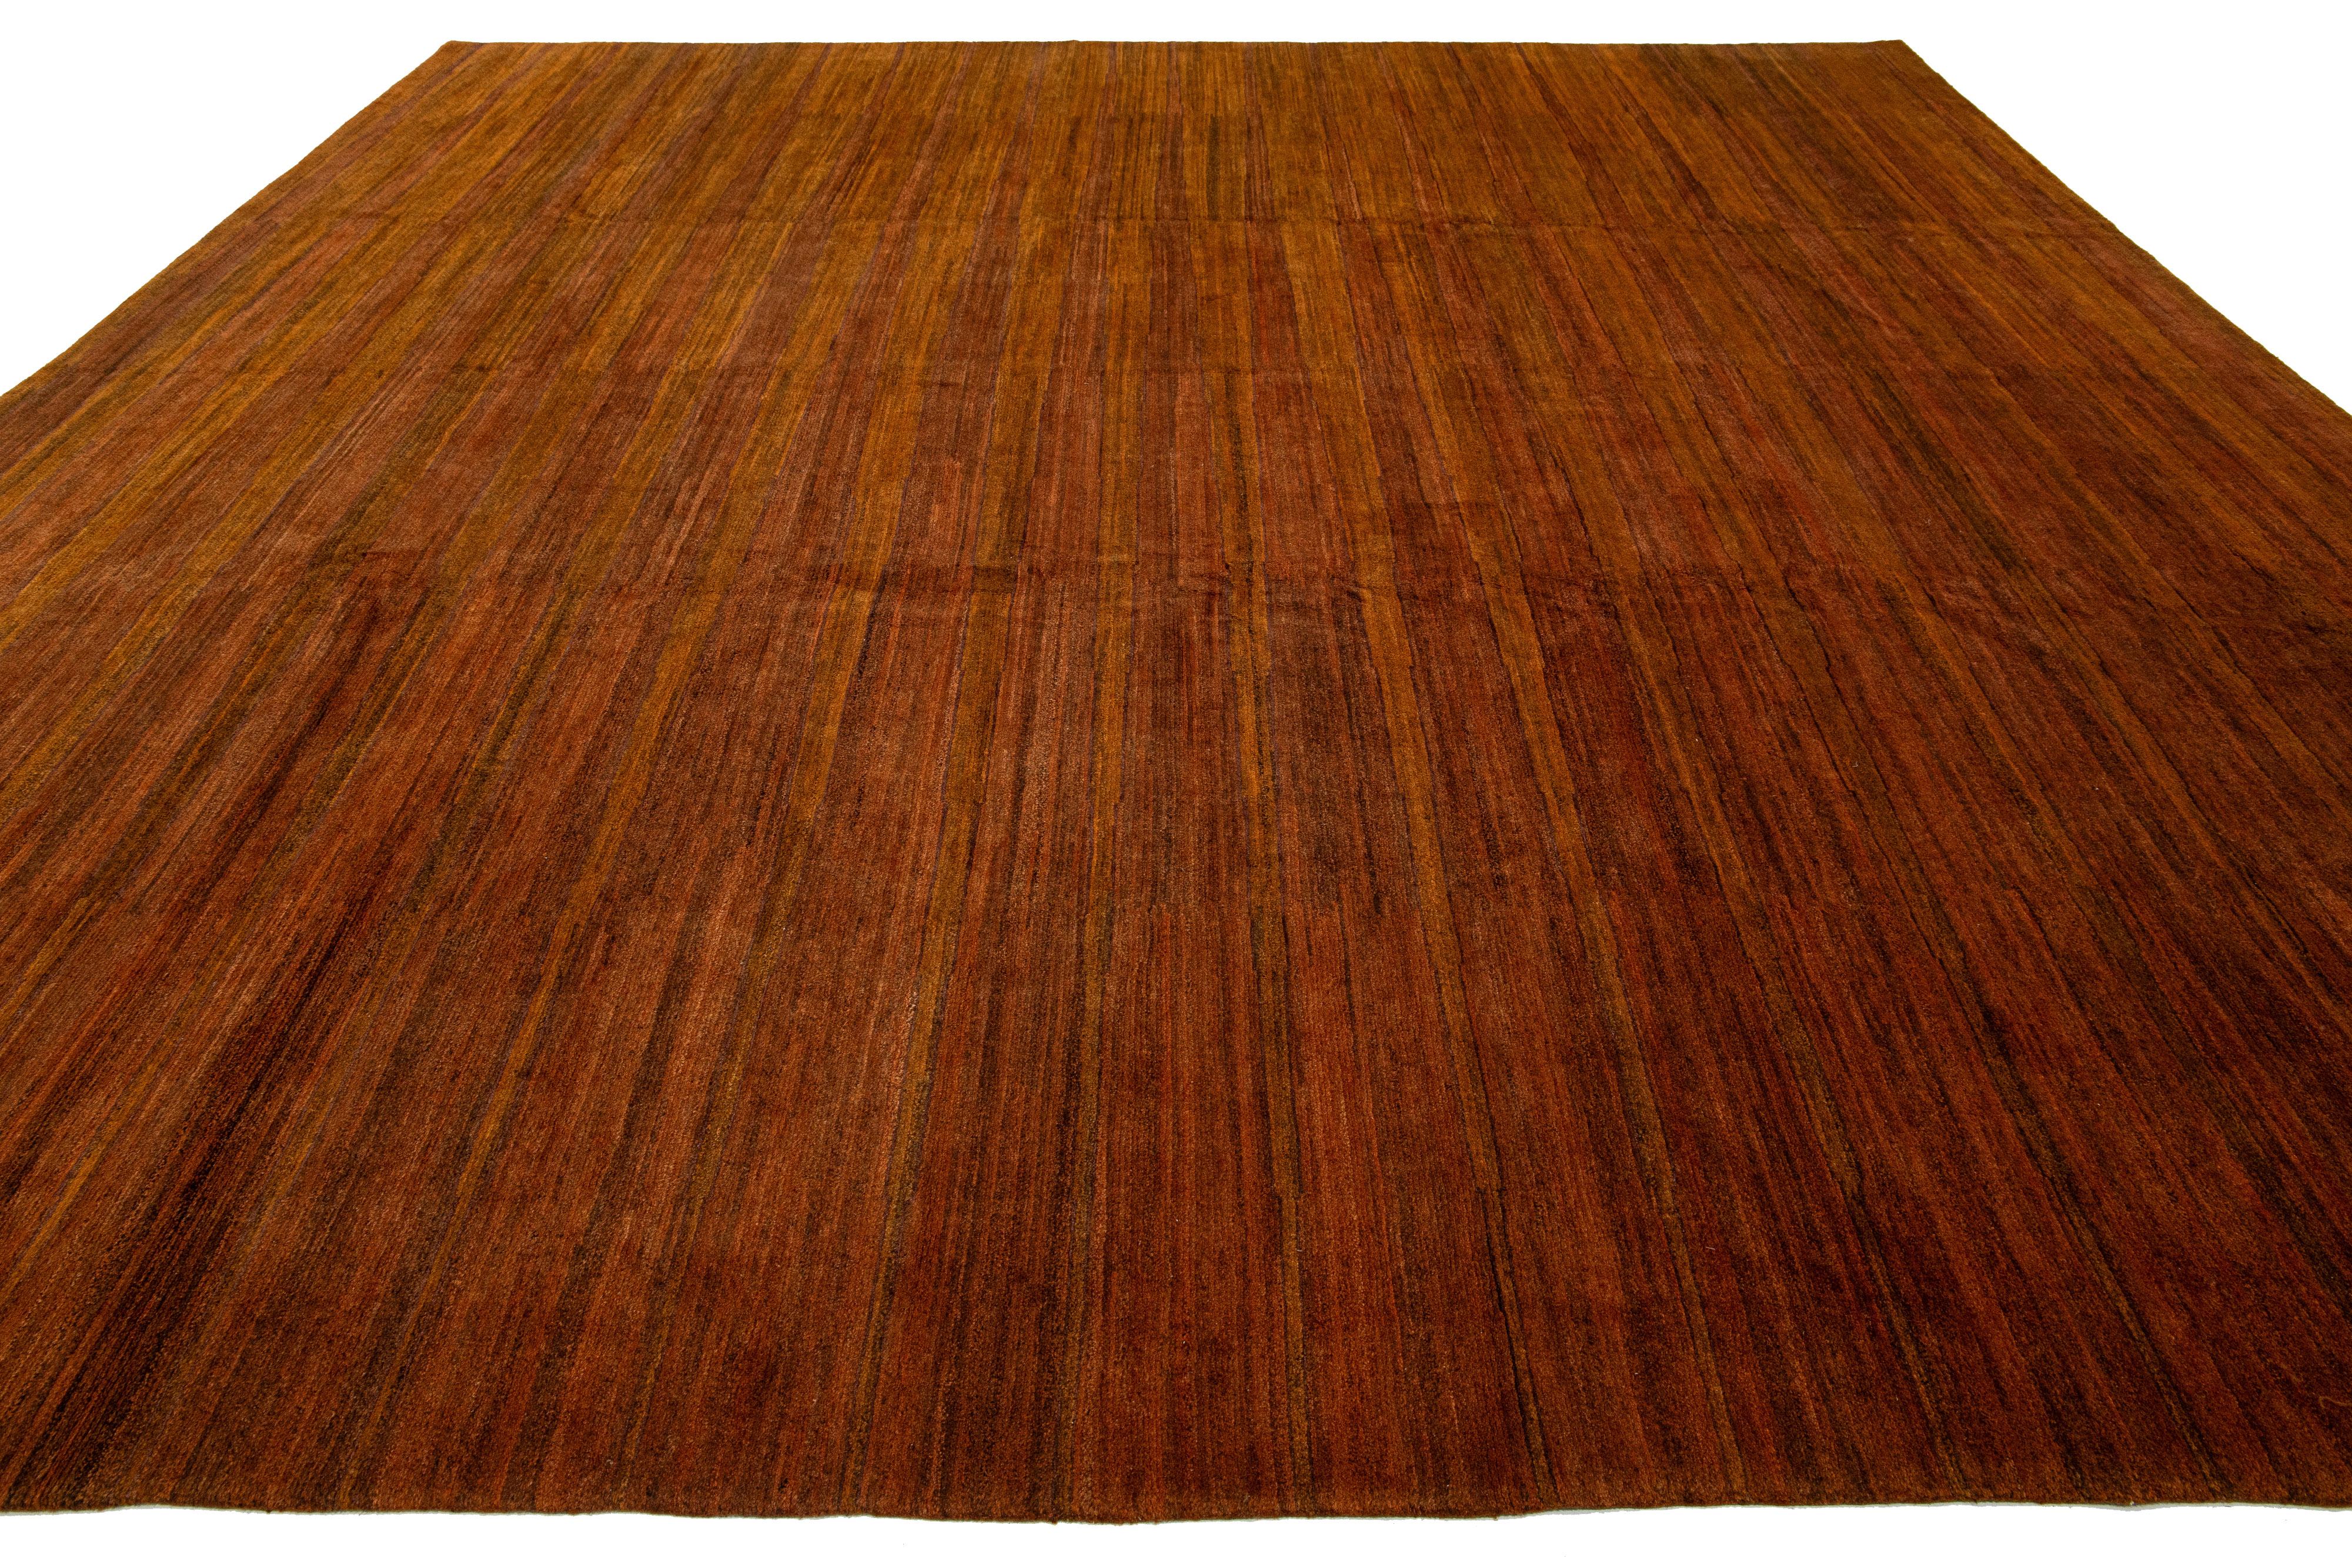 Hand-Knotted Modern Striped Tibetan Square Wool & Silk Rug With Earthy Tones For Sale